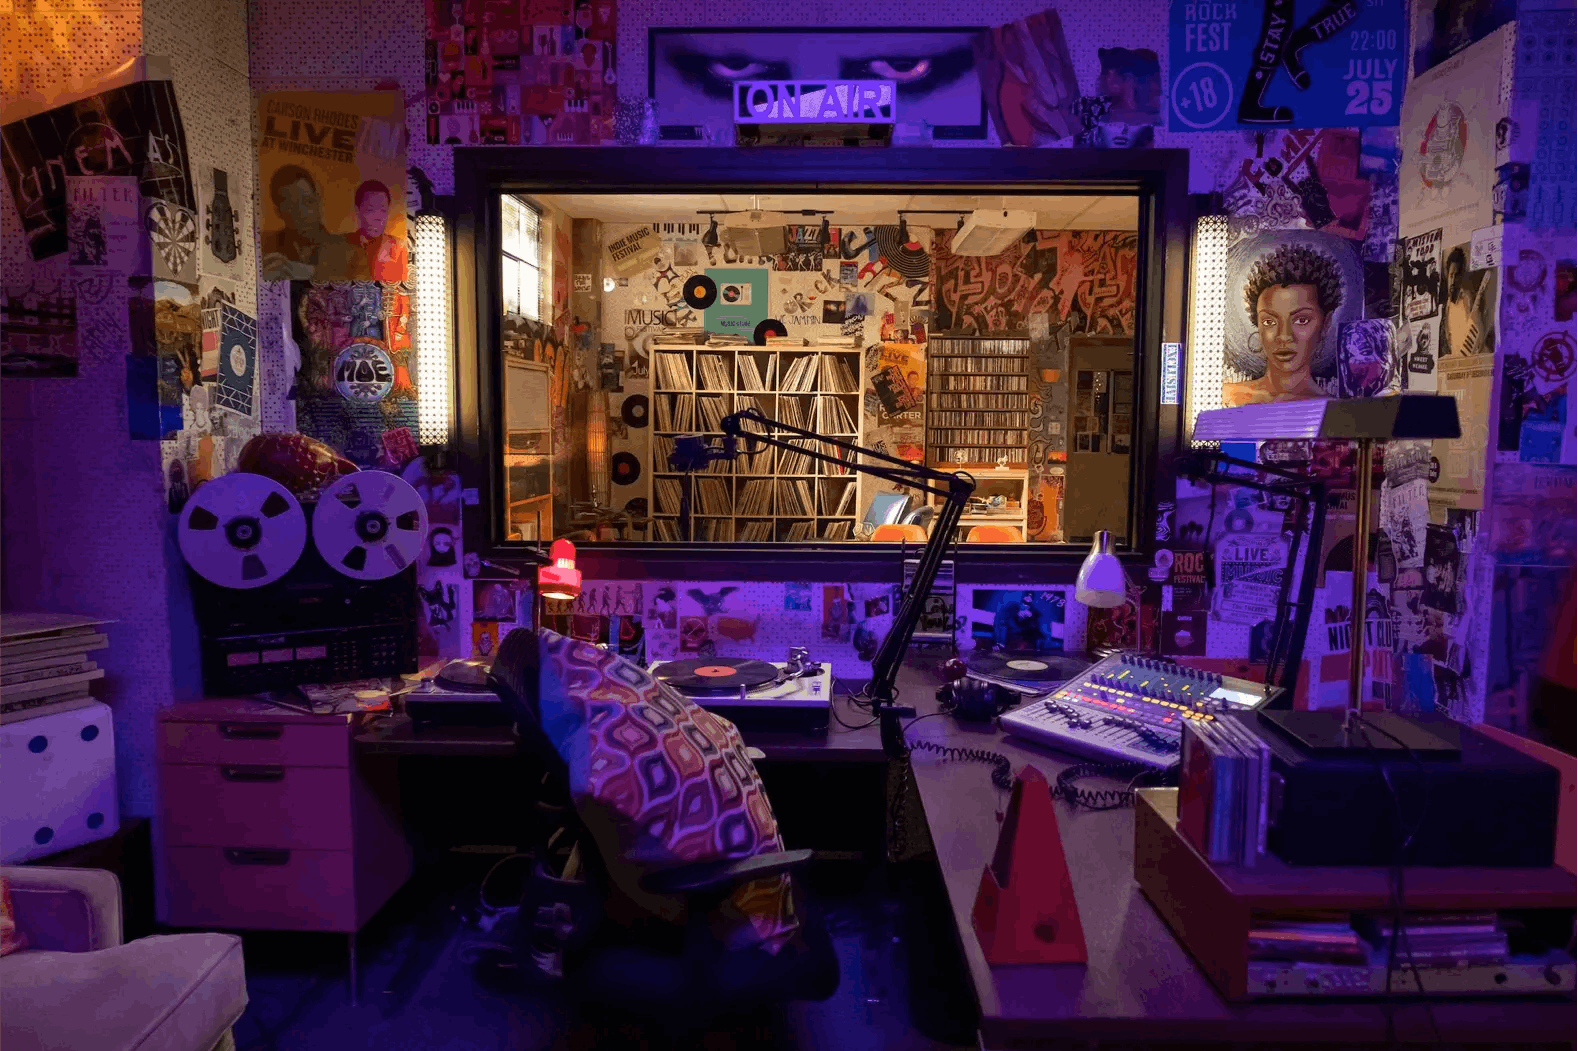 A blue lit shot of the inside of the recording booth. The walls are lined with art and posters and there is a massive mic in the middle of the room.